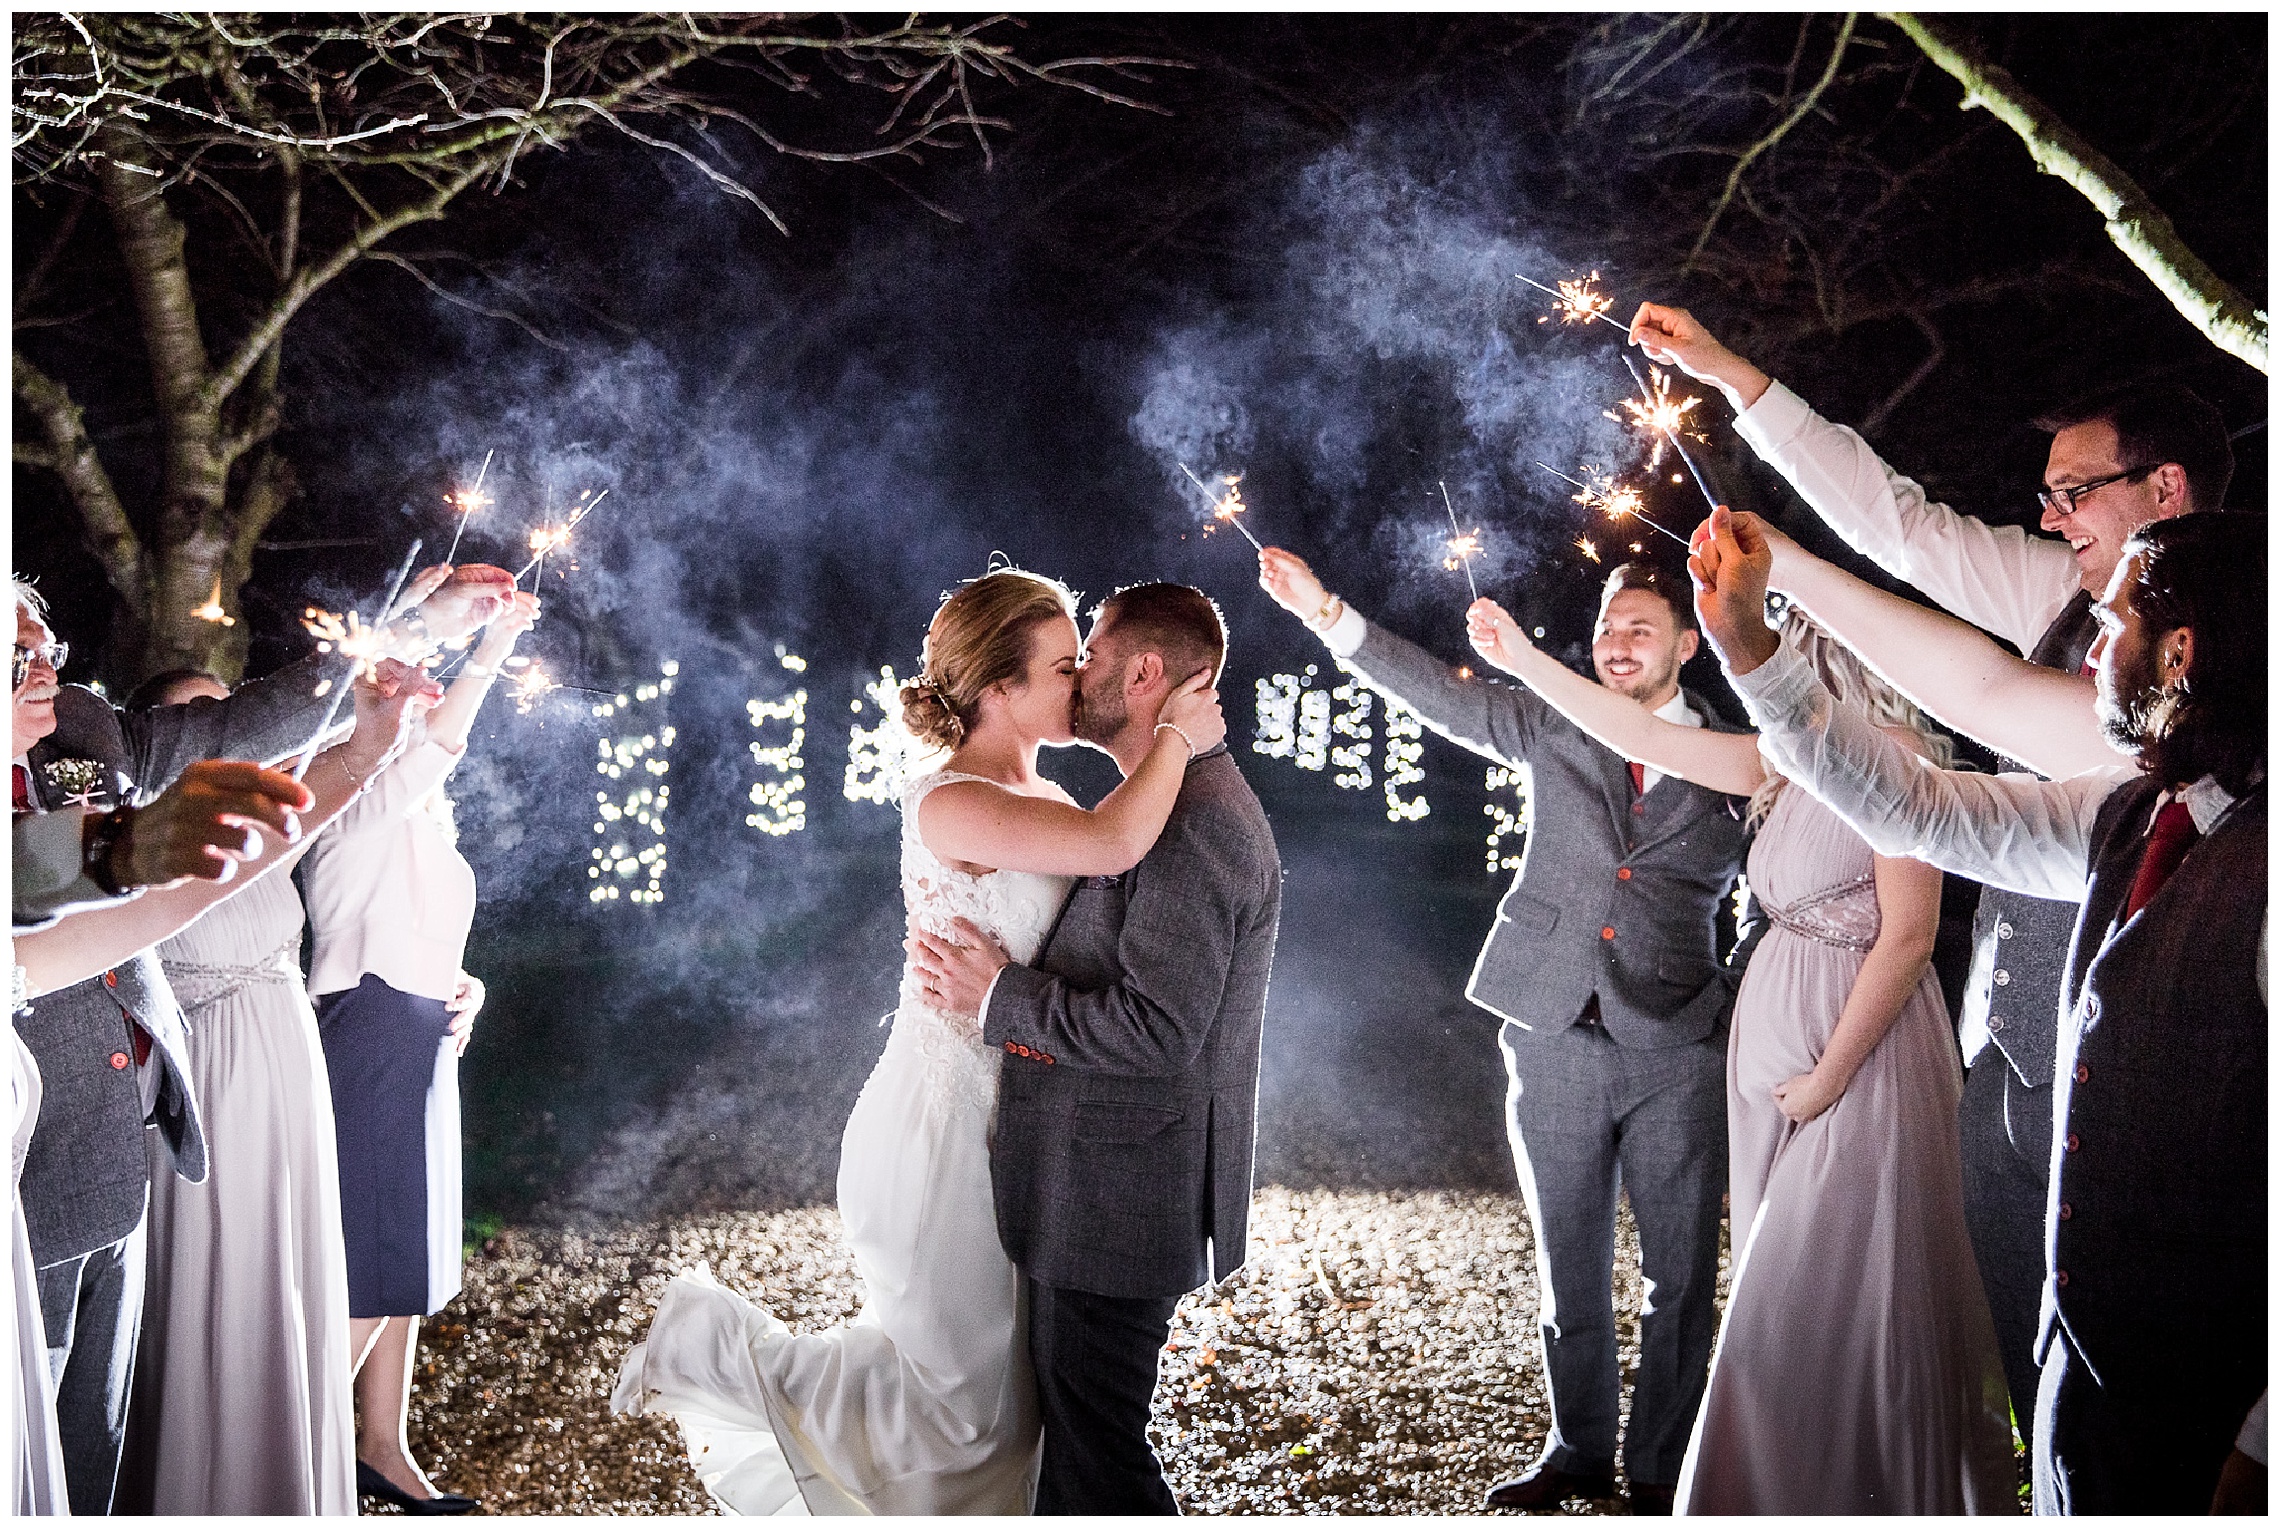 sparklers outside with bridesmaids and groomsmen, bride and groom kissing